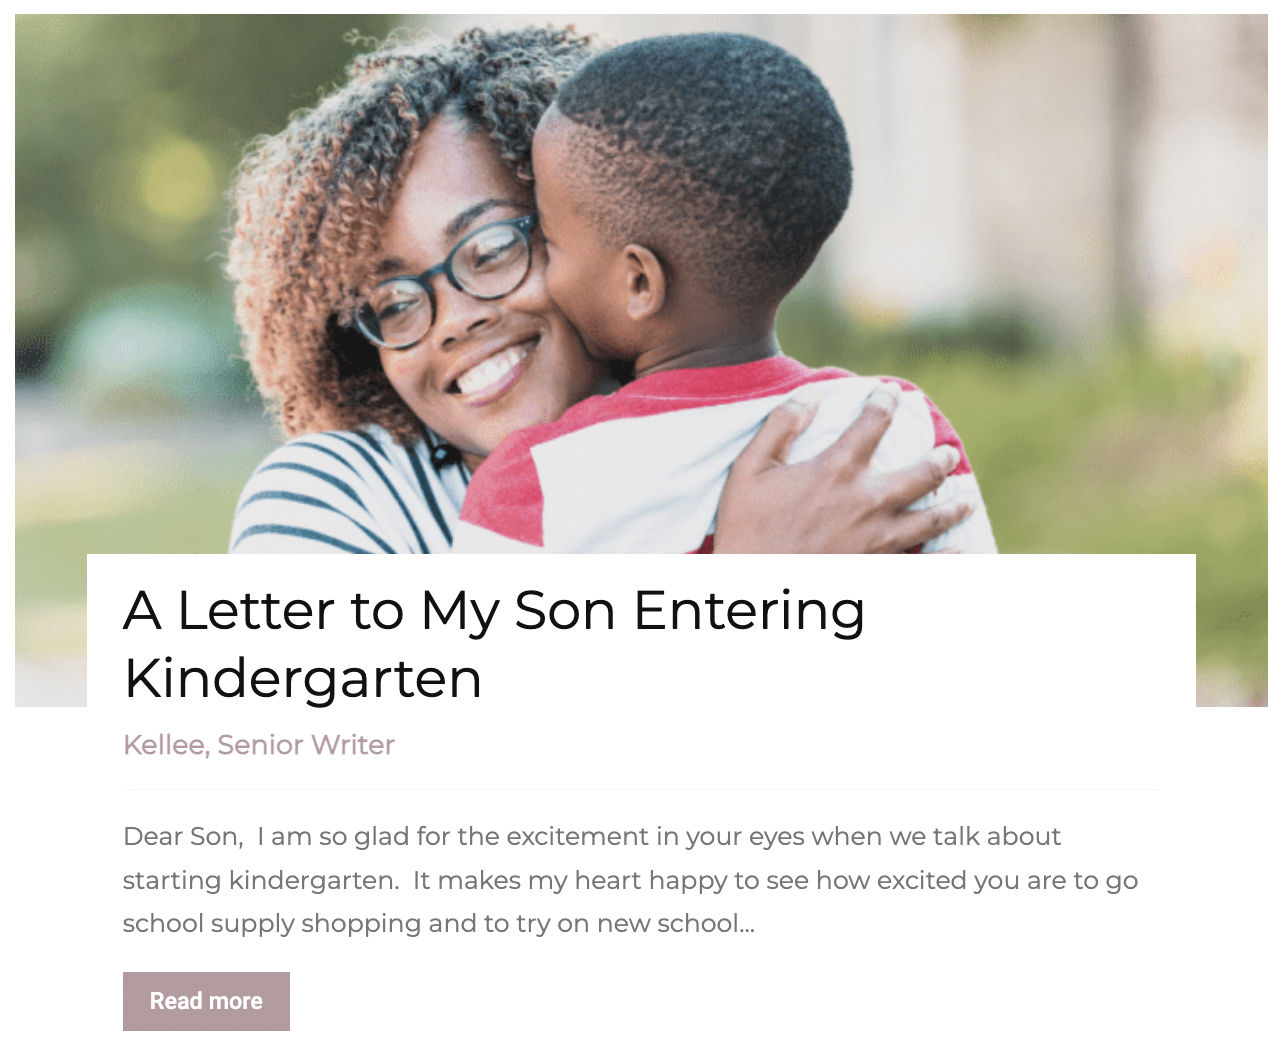 A Letter to Me Son Article